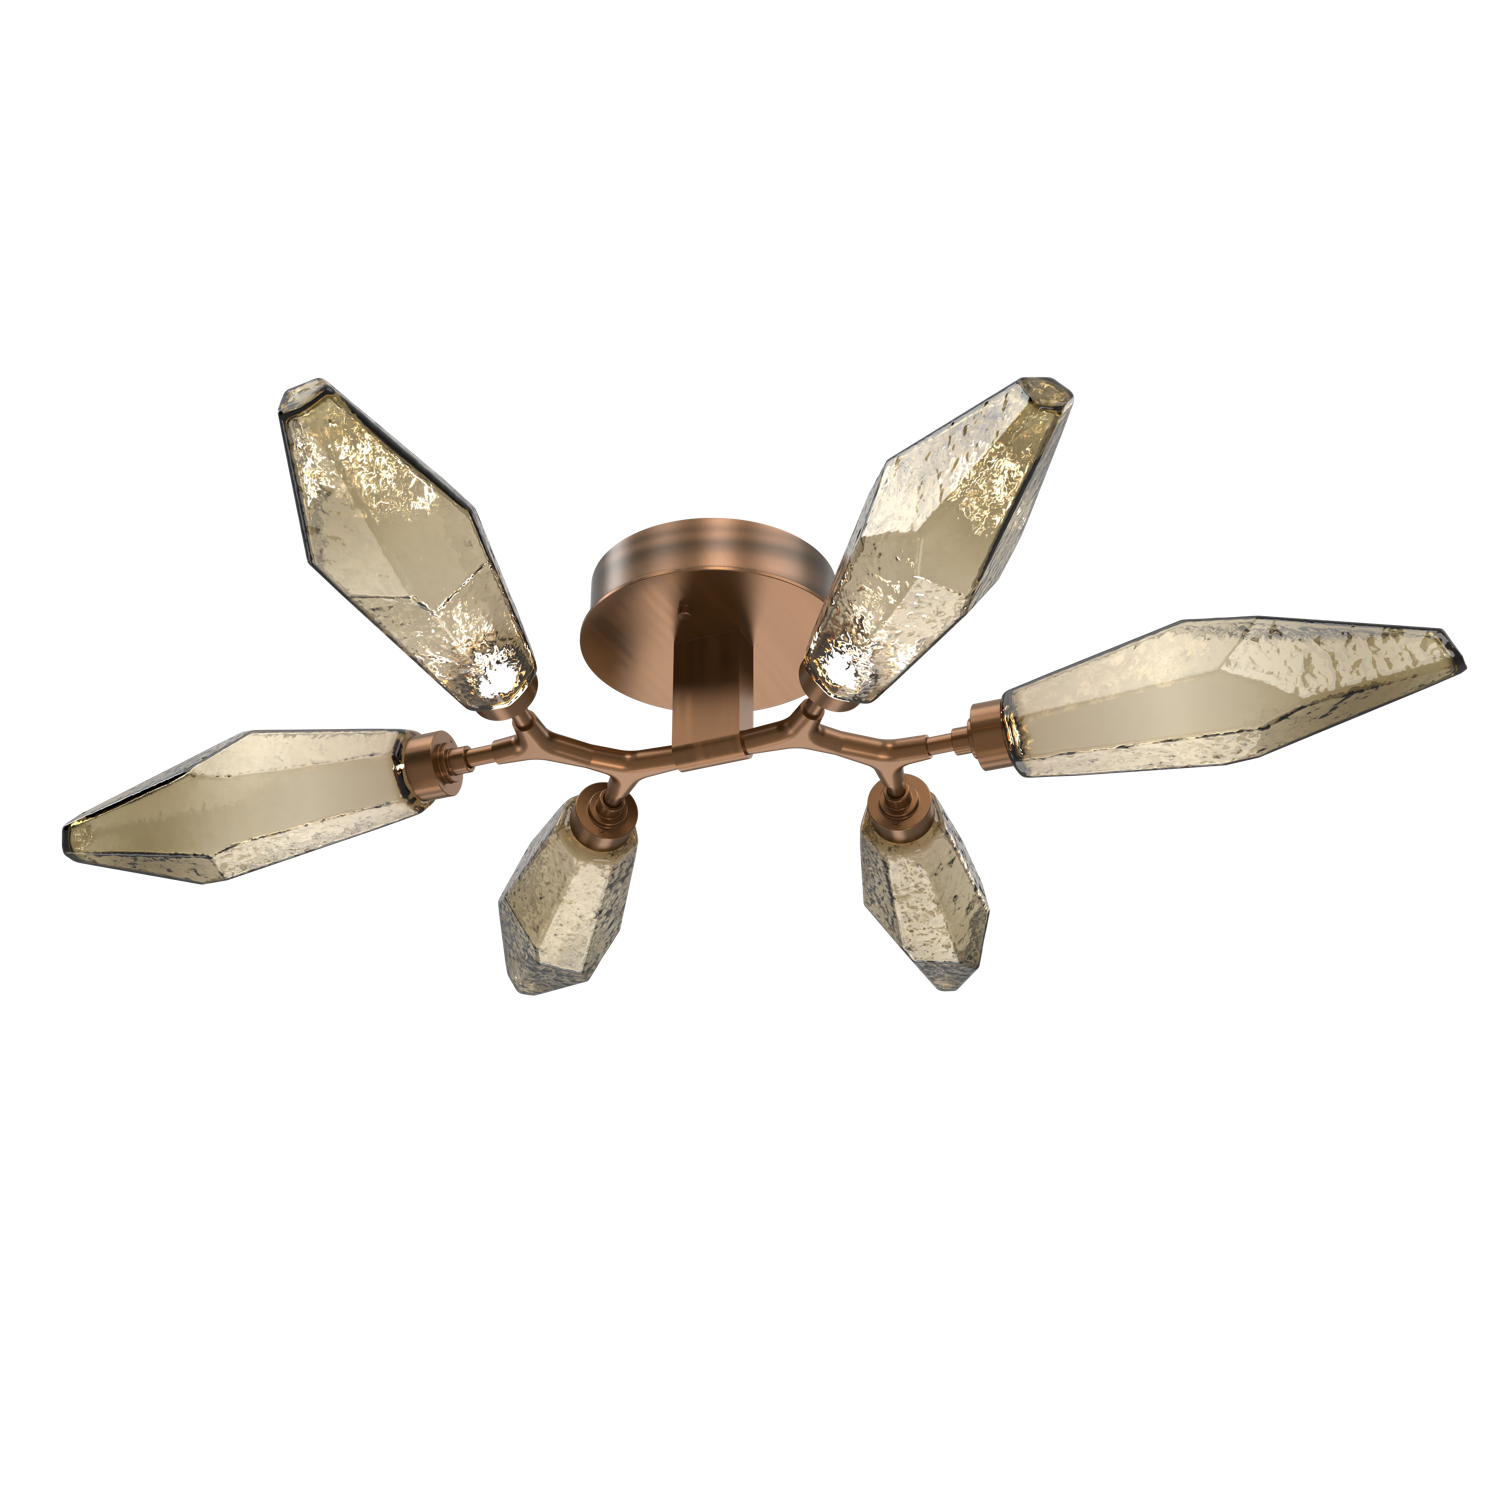 CLB0050-01-RB-CB-Hammerton-Studio-Rock-Crystal-flush-mount-light-with-oil-rubbed-bronze-finish-and-chilled-bronze-blown-glass-shades-and-LED-lamping